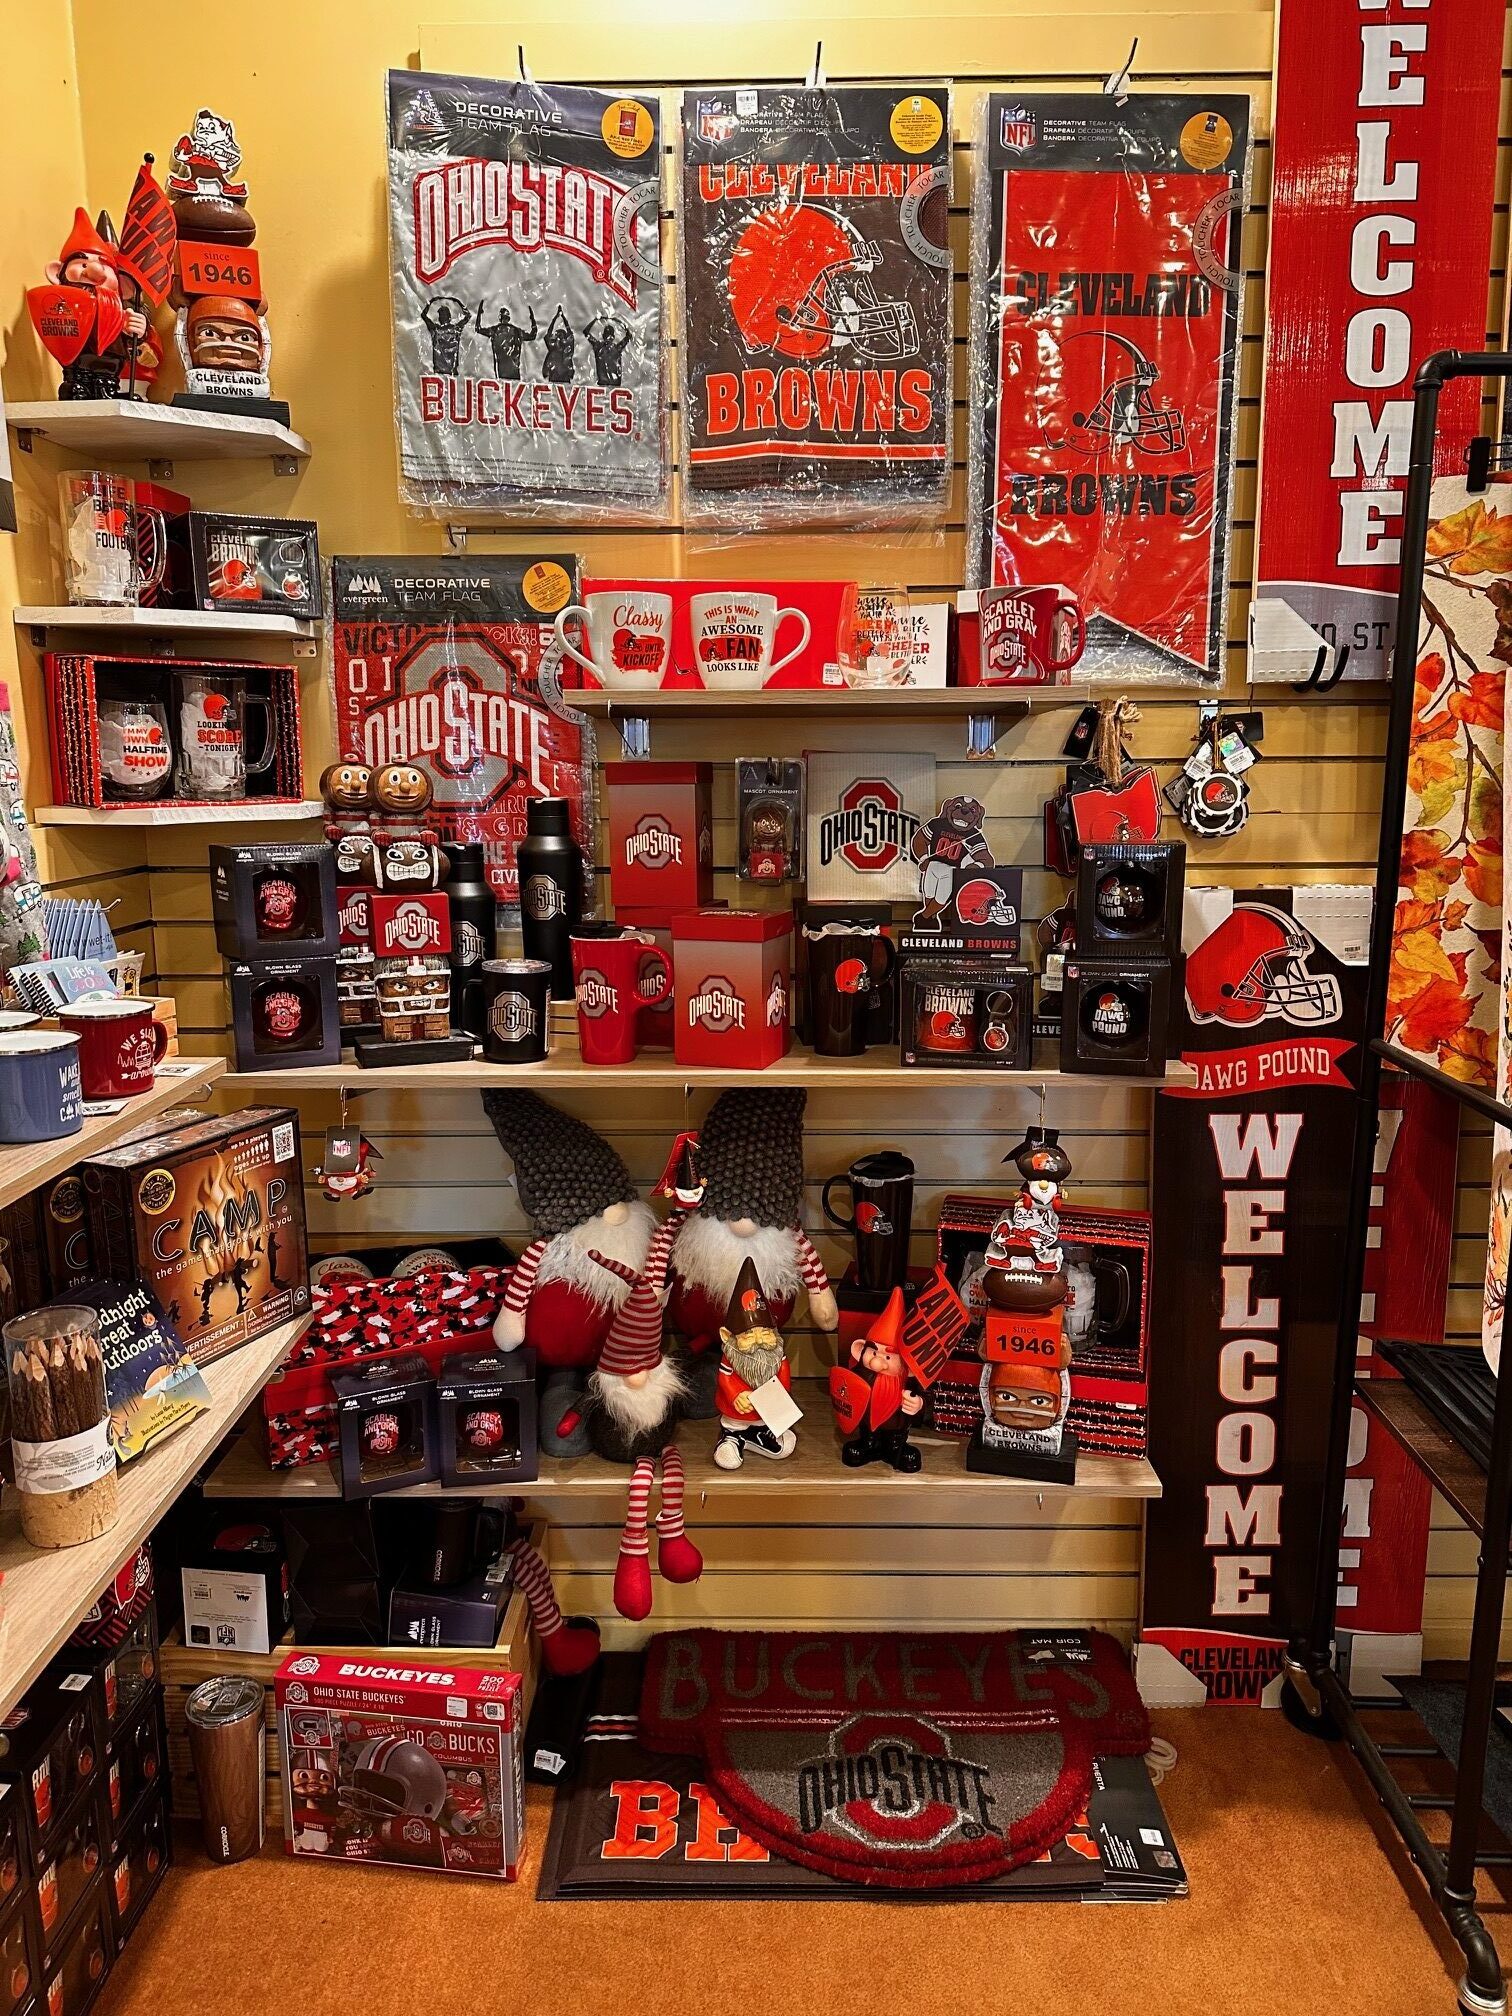 Ohio State and Browns Gear and Gifts